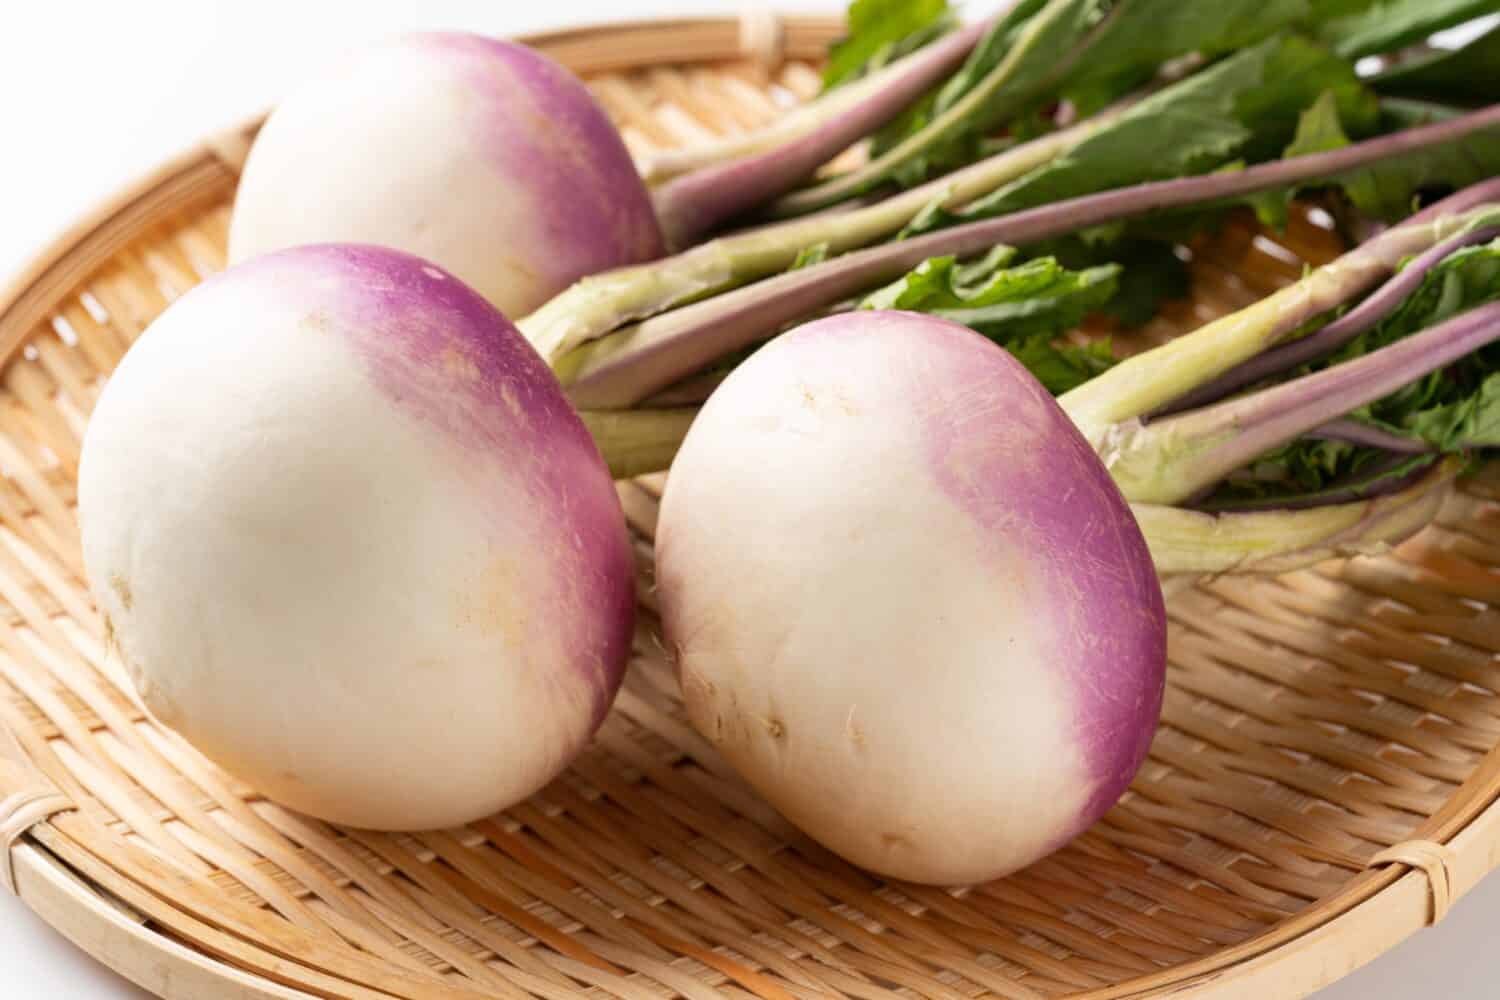 Delicious fresh turnips.Turnip is one of the typical root vegetables eaten all over the world.